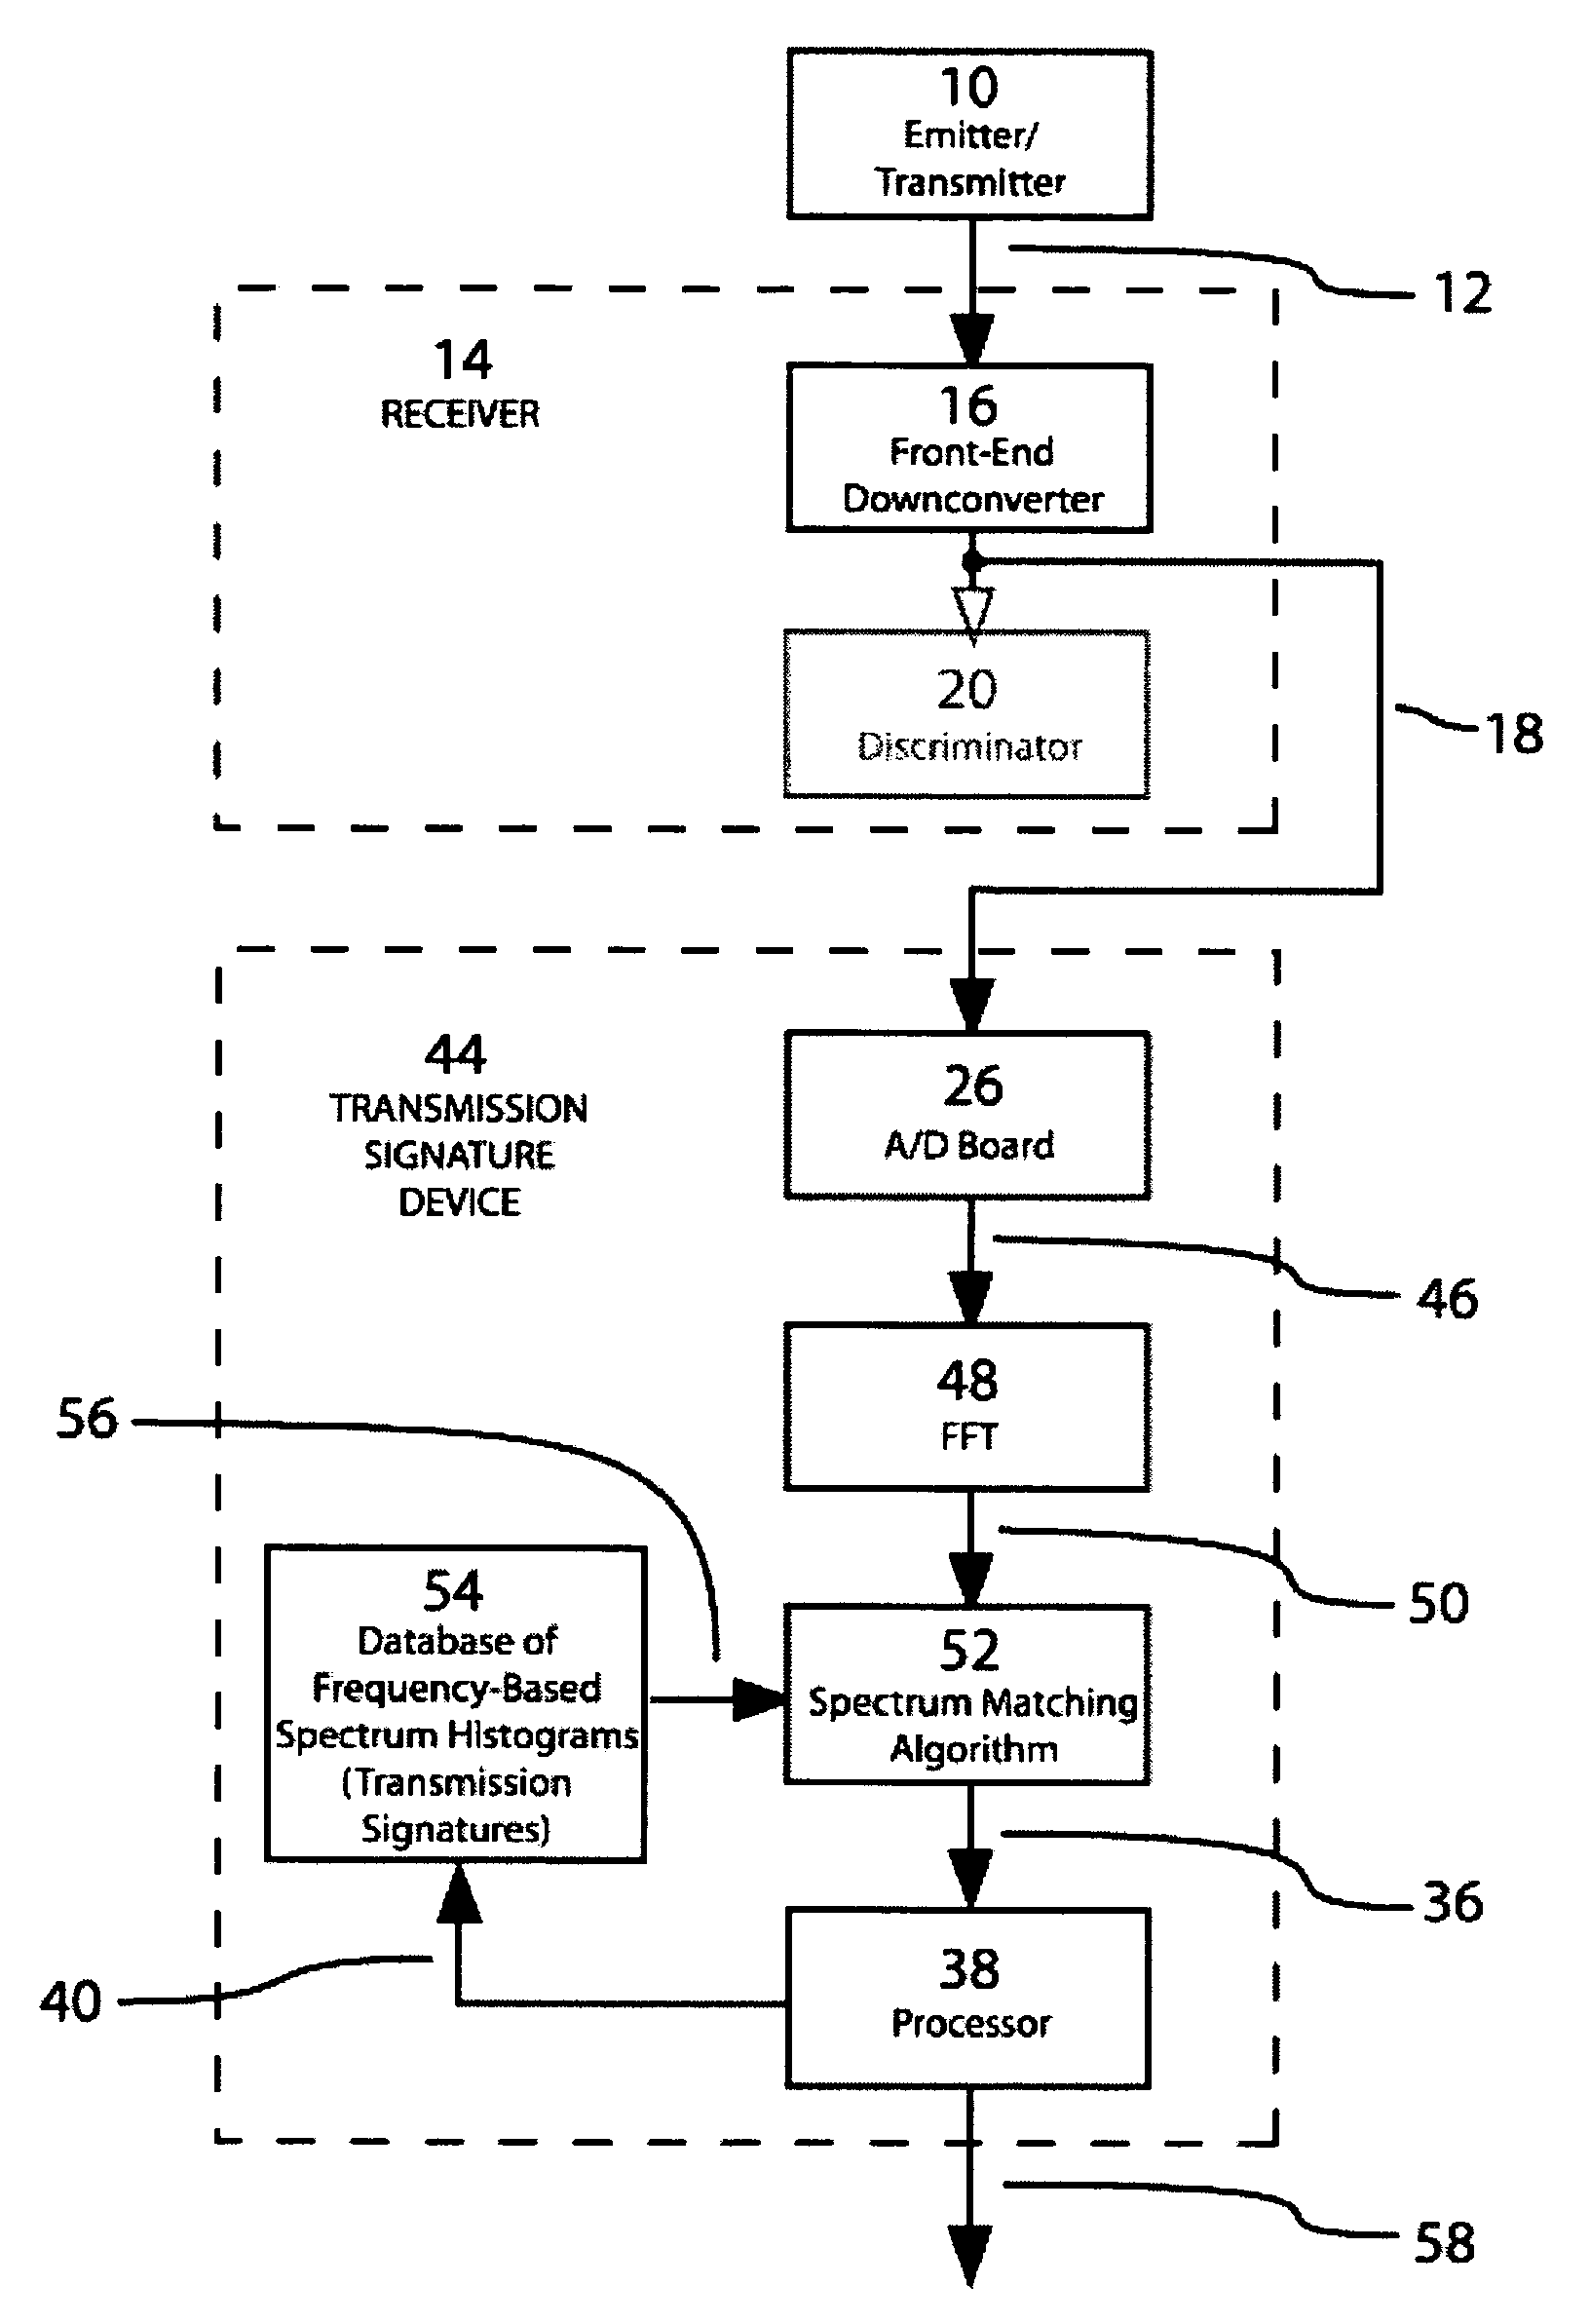 Method and system for emitter identification using transmission signatures